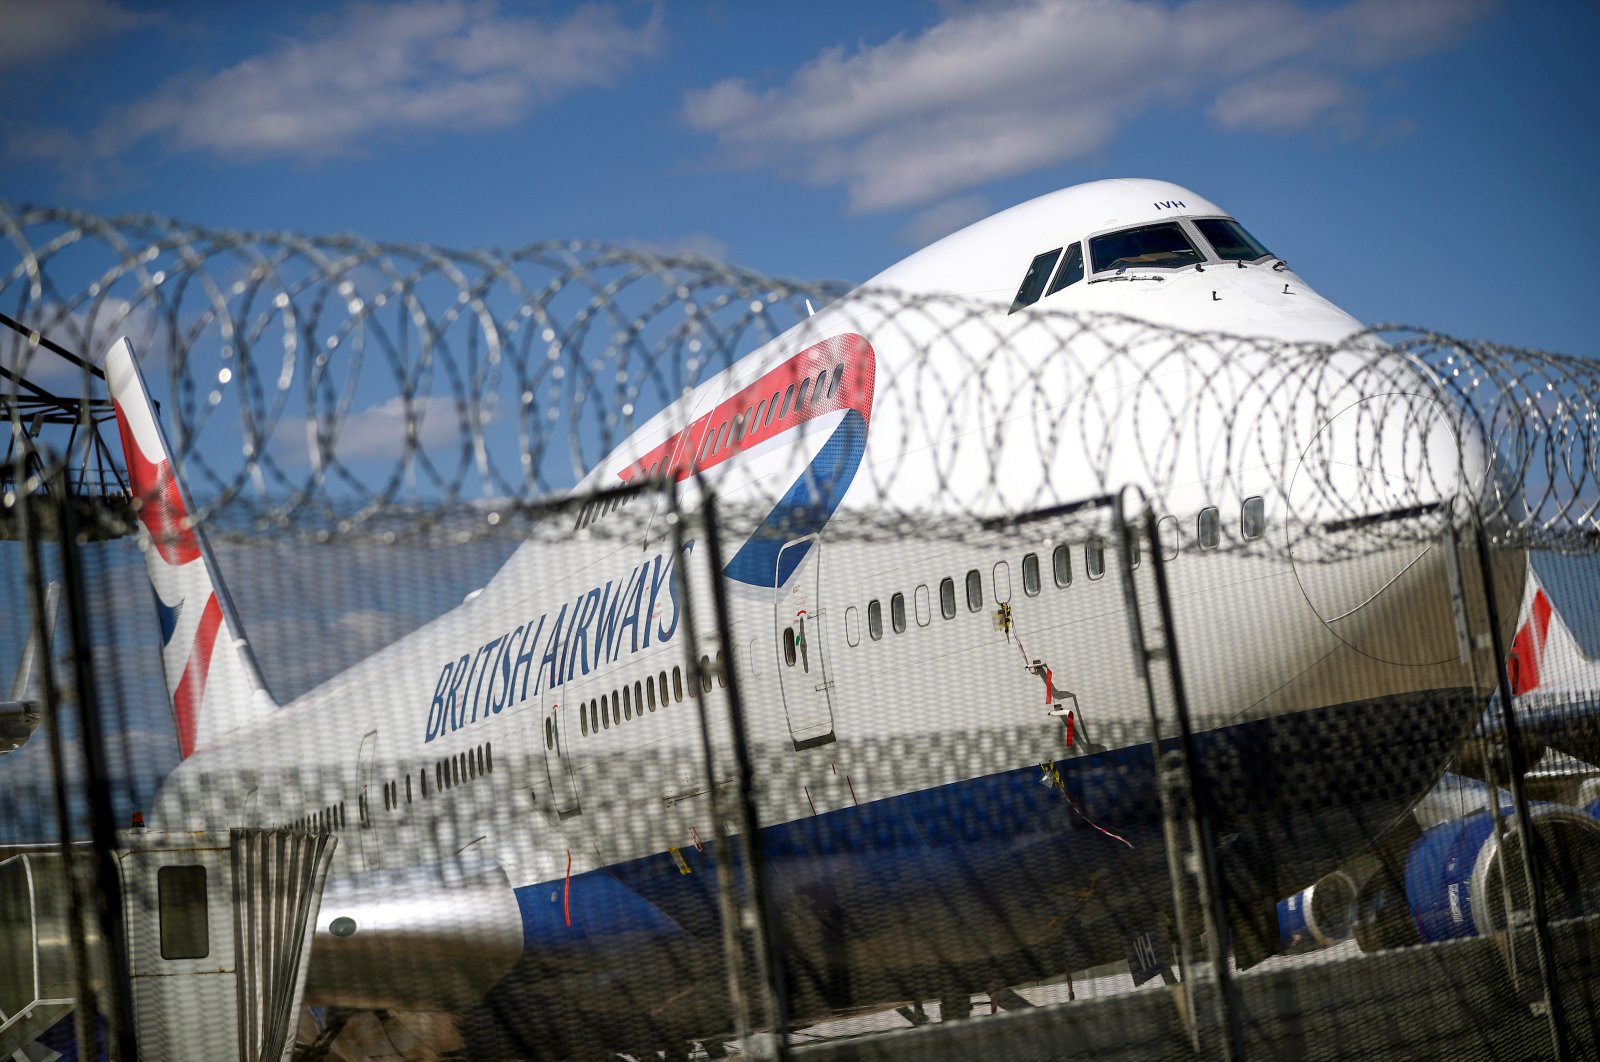 A British Airways Boeing 747 is seen at the Heathrow Airport in London, Britain, July 17, 2020. (Reuters Photo)